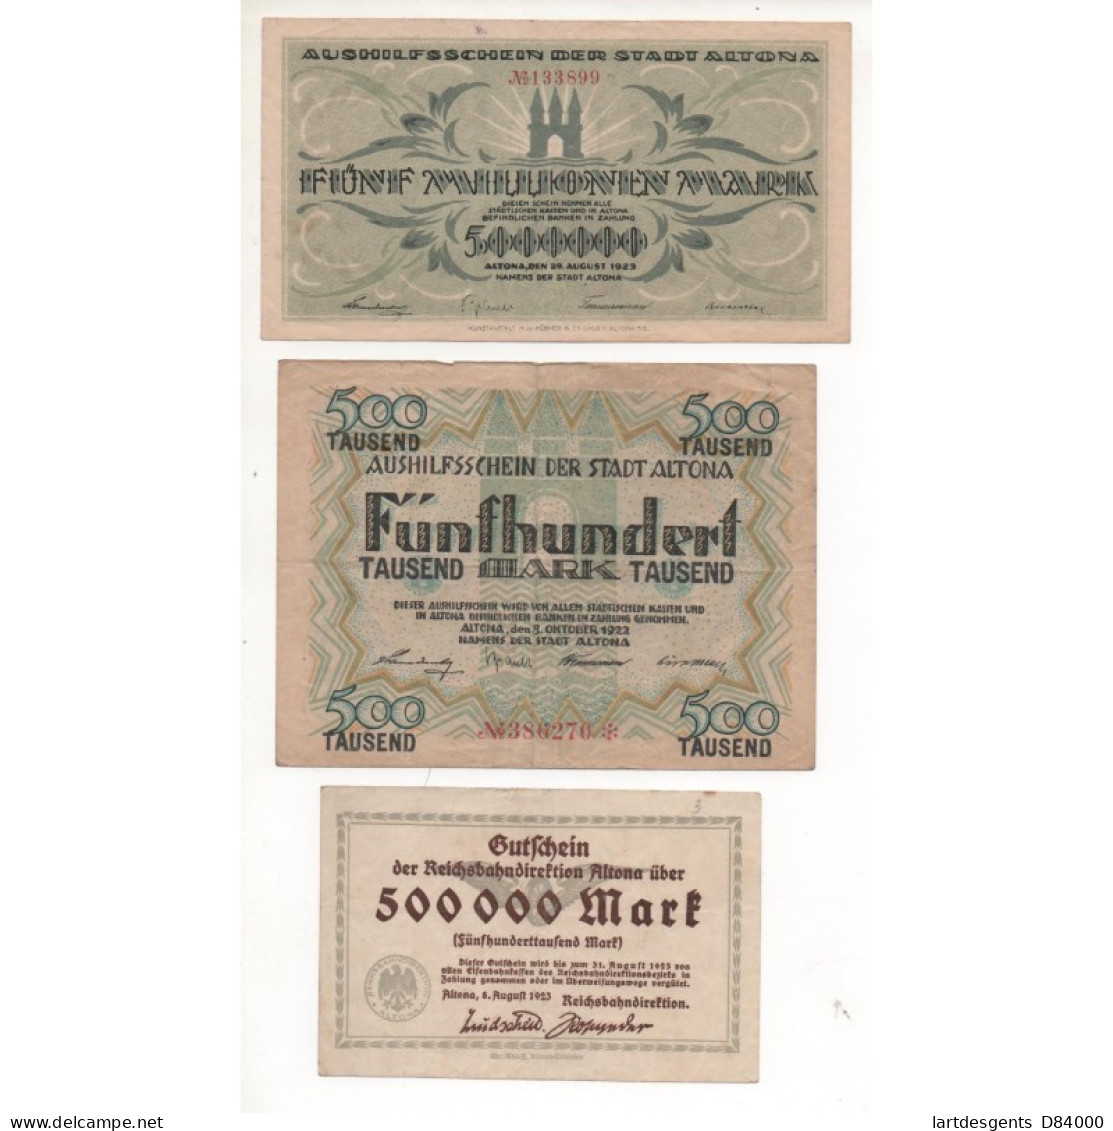 NOTGELD - ALTONA - 3 Different Notes 500.000 & 5 Millionen & 500 Mark (A038) - [11] Local Banknote Issues